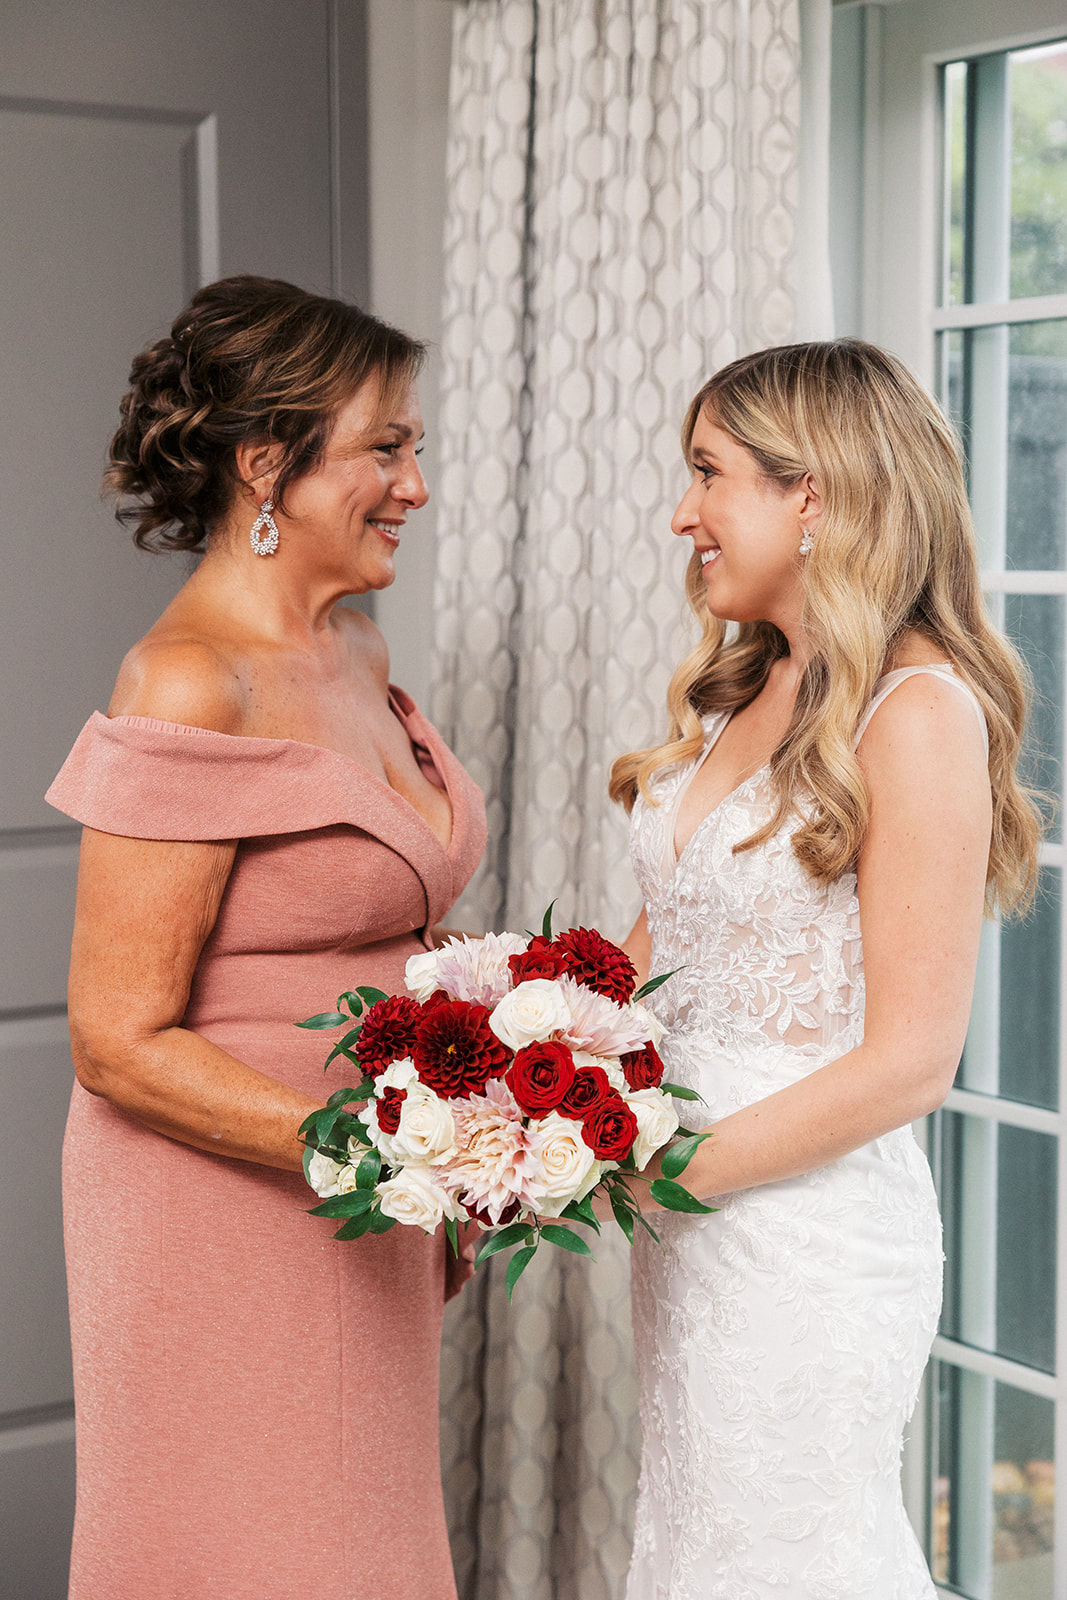 A bride smiles with her mom in the getting ready room by a window